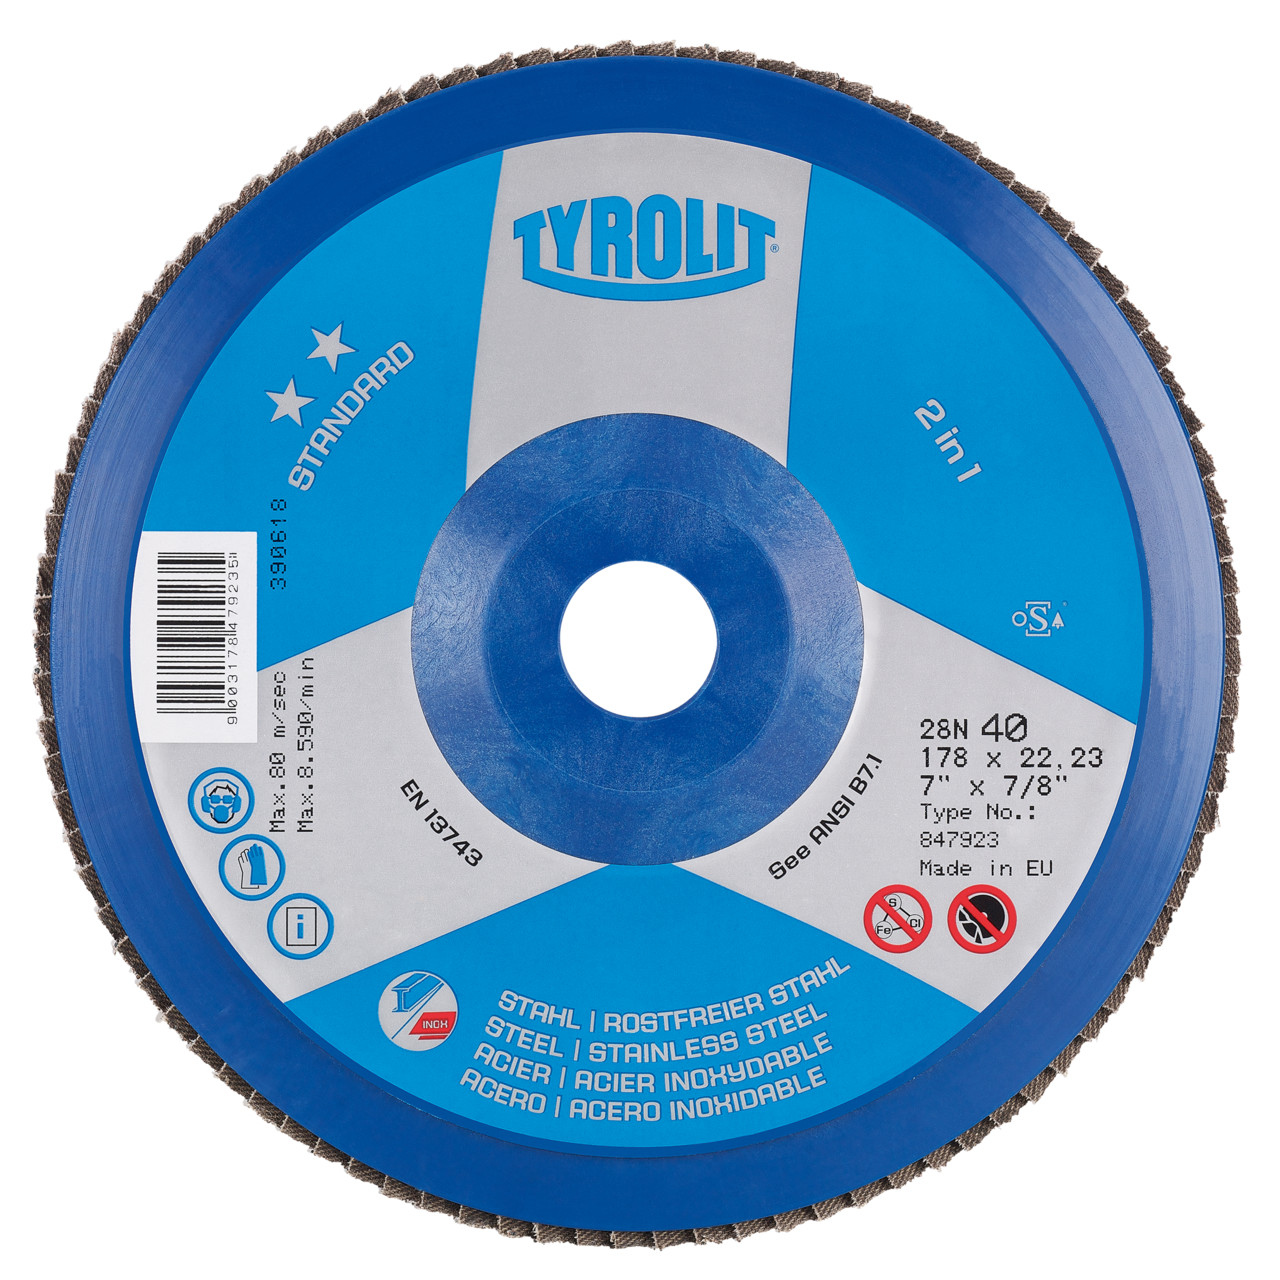 Tyrolit Serrated lock washer DxH 115x22.2 2in1 for steel and stainless steel, P40, shape: 28N - straight version (plastic carrier body), Art. 847917